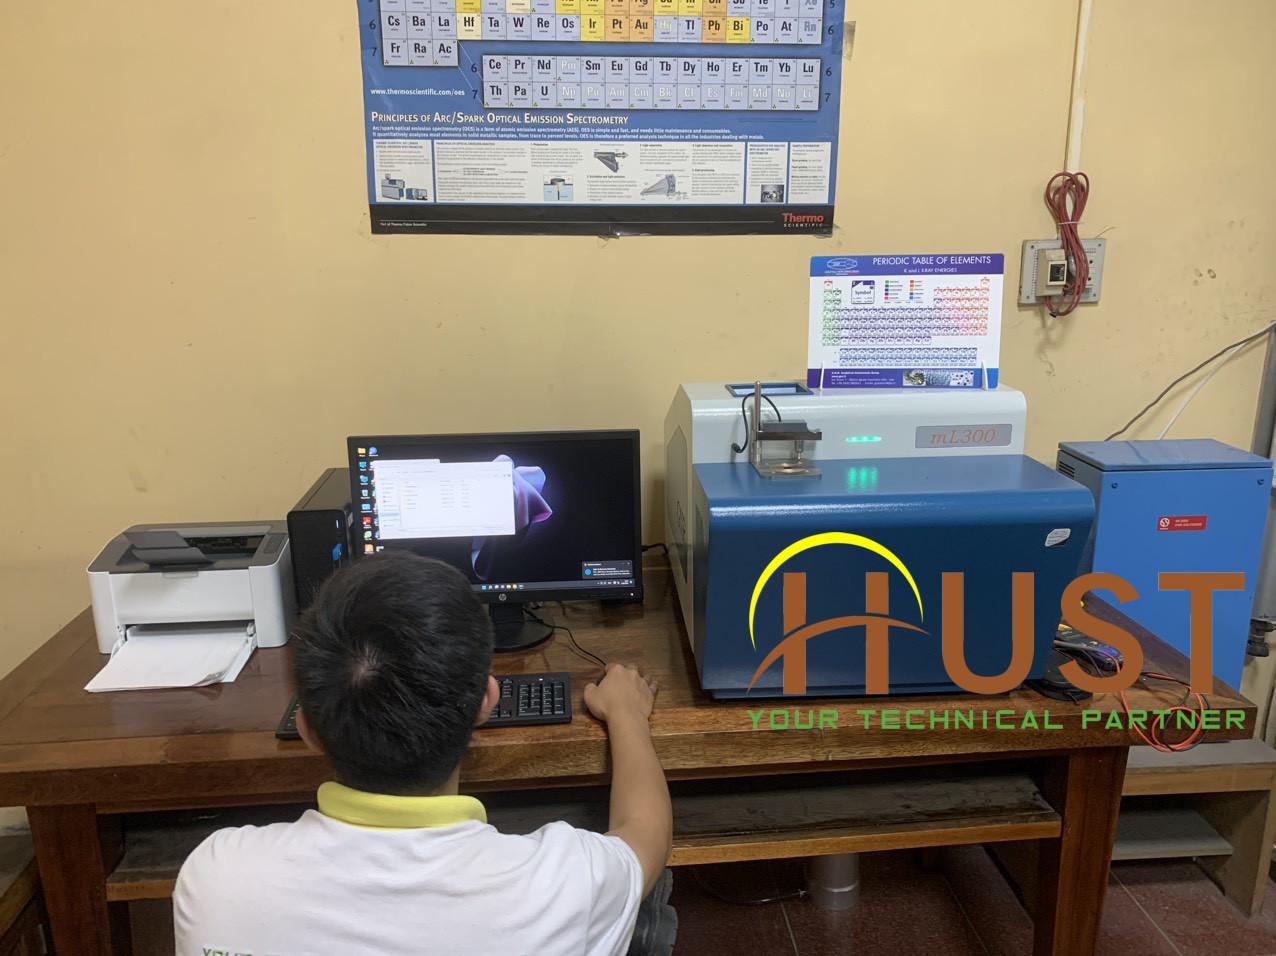 Installation S3 Minilab 300 Optical Emission Spectrometry for customers in Quang Ninh province